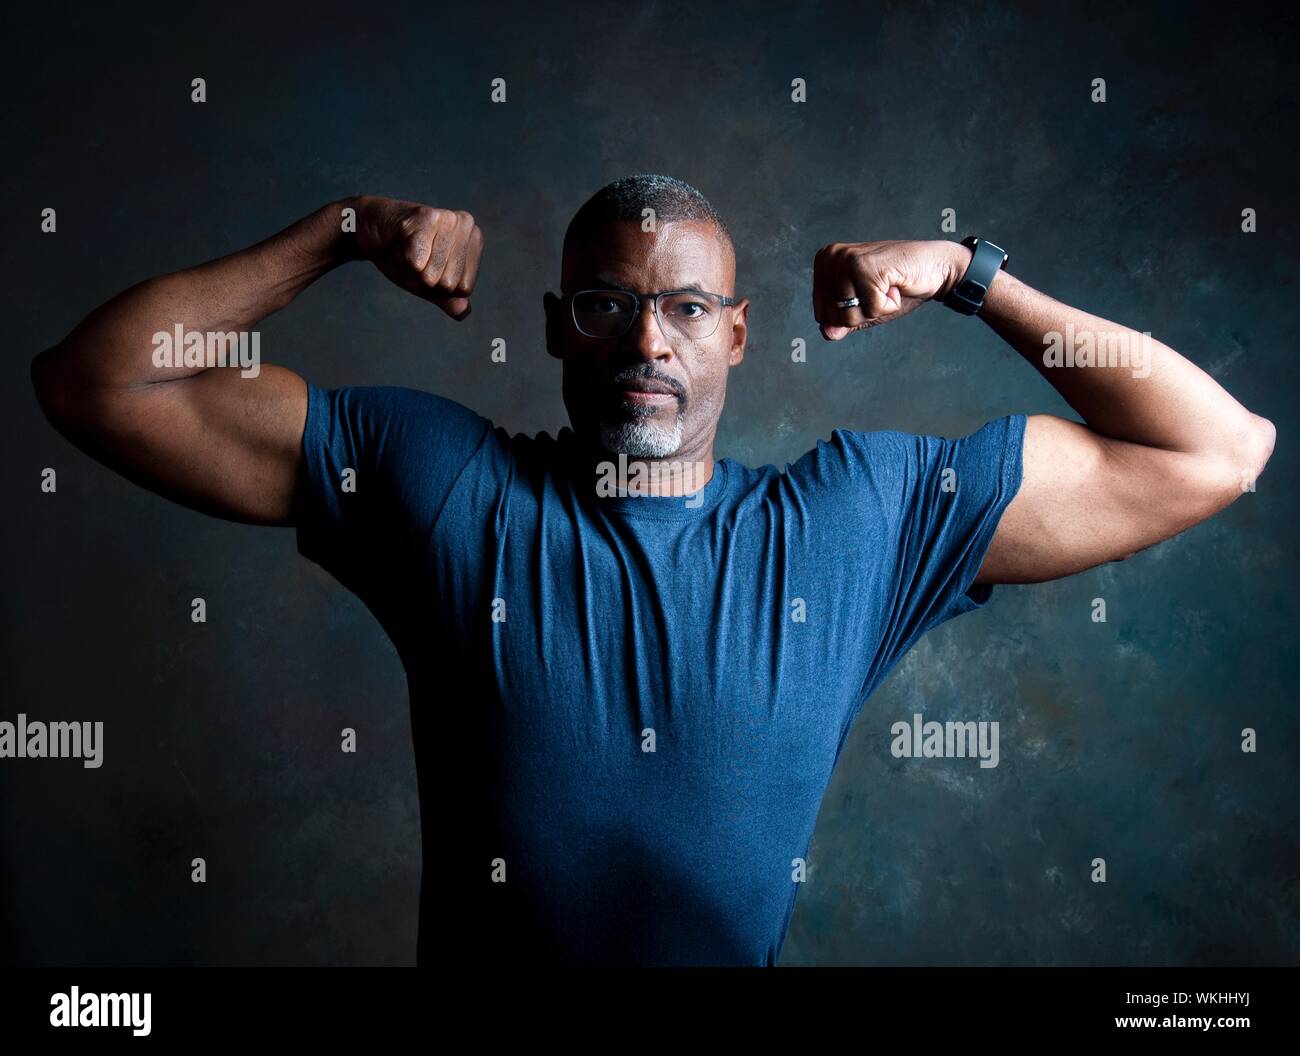 Powerful Man High Resolution Stock Photography and Images - Alamy